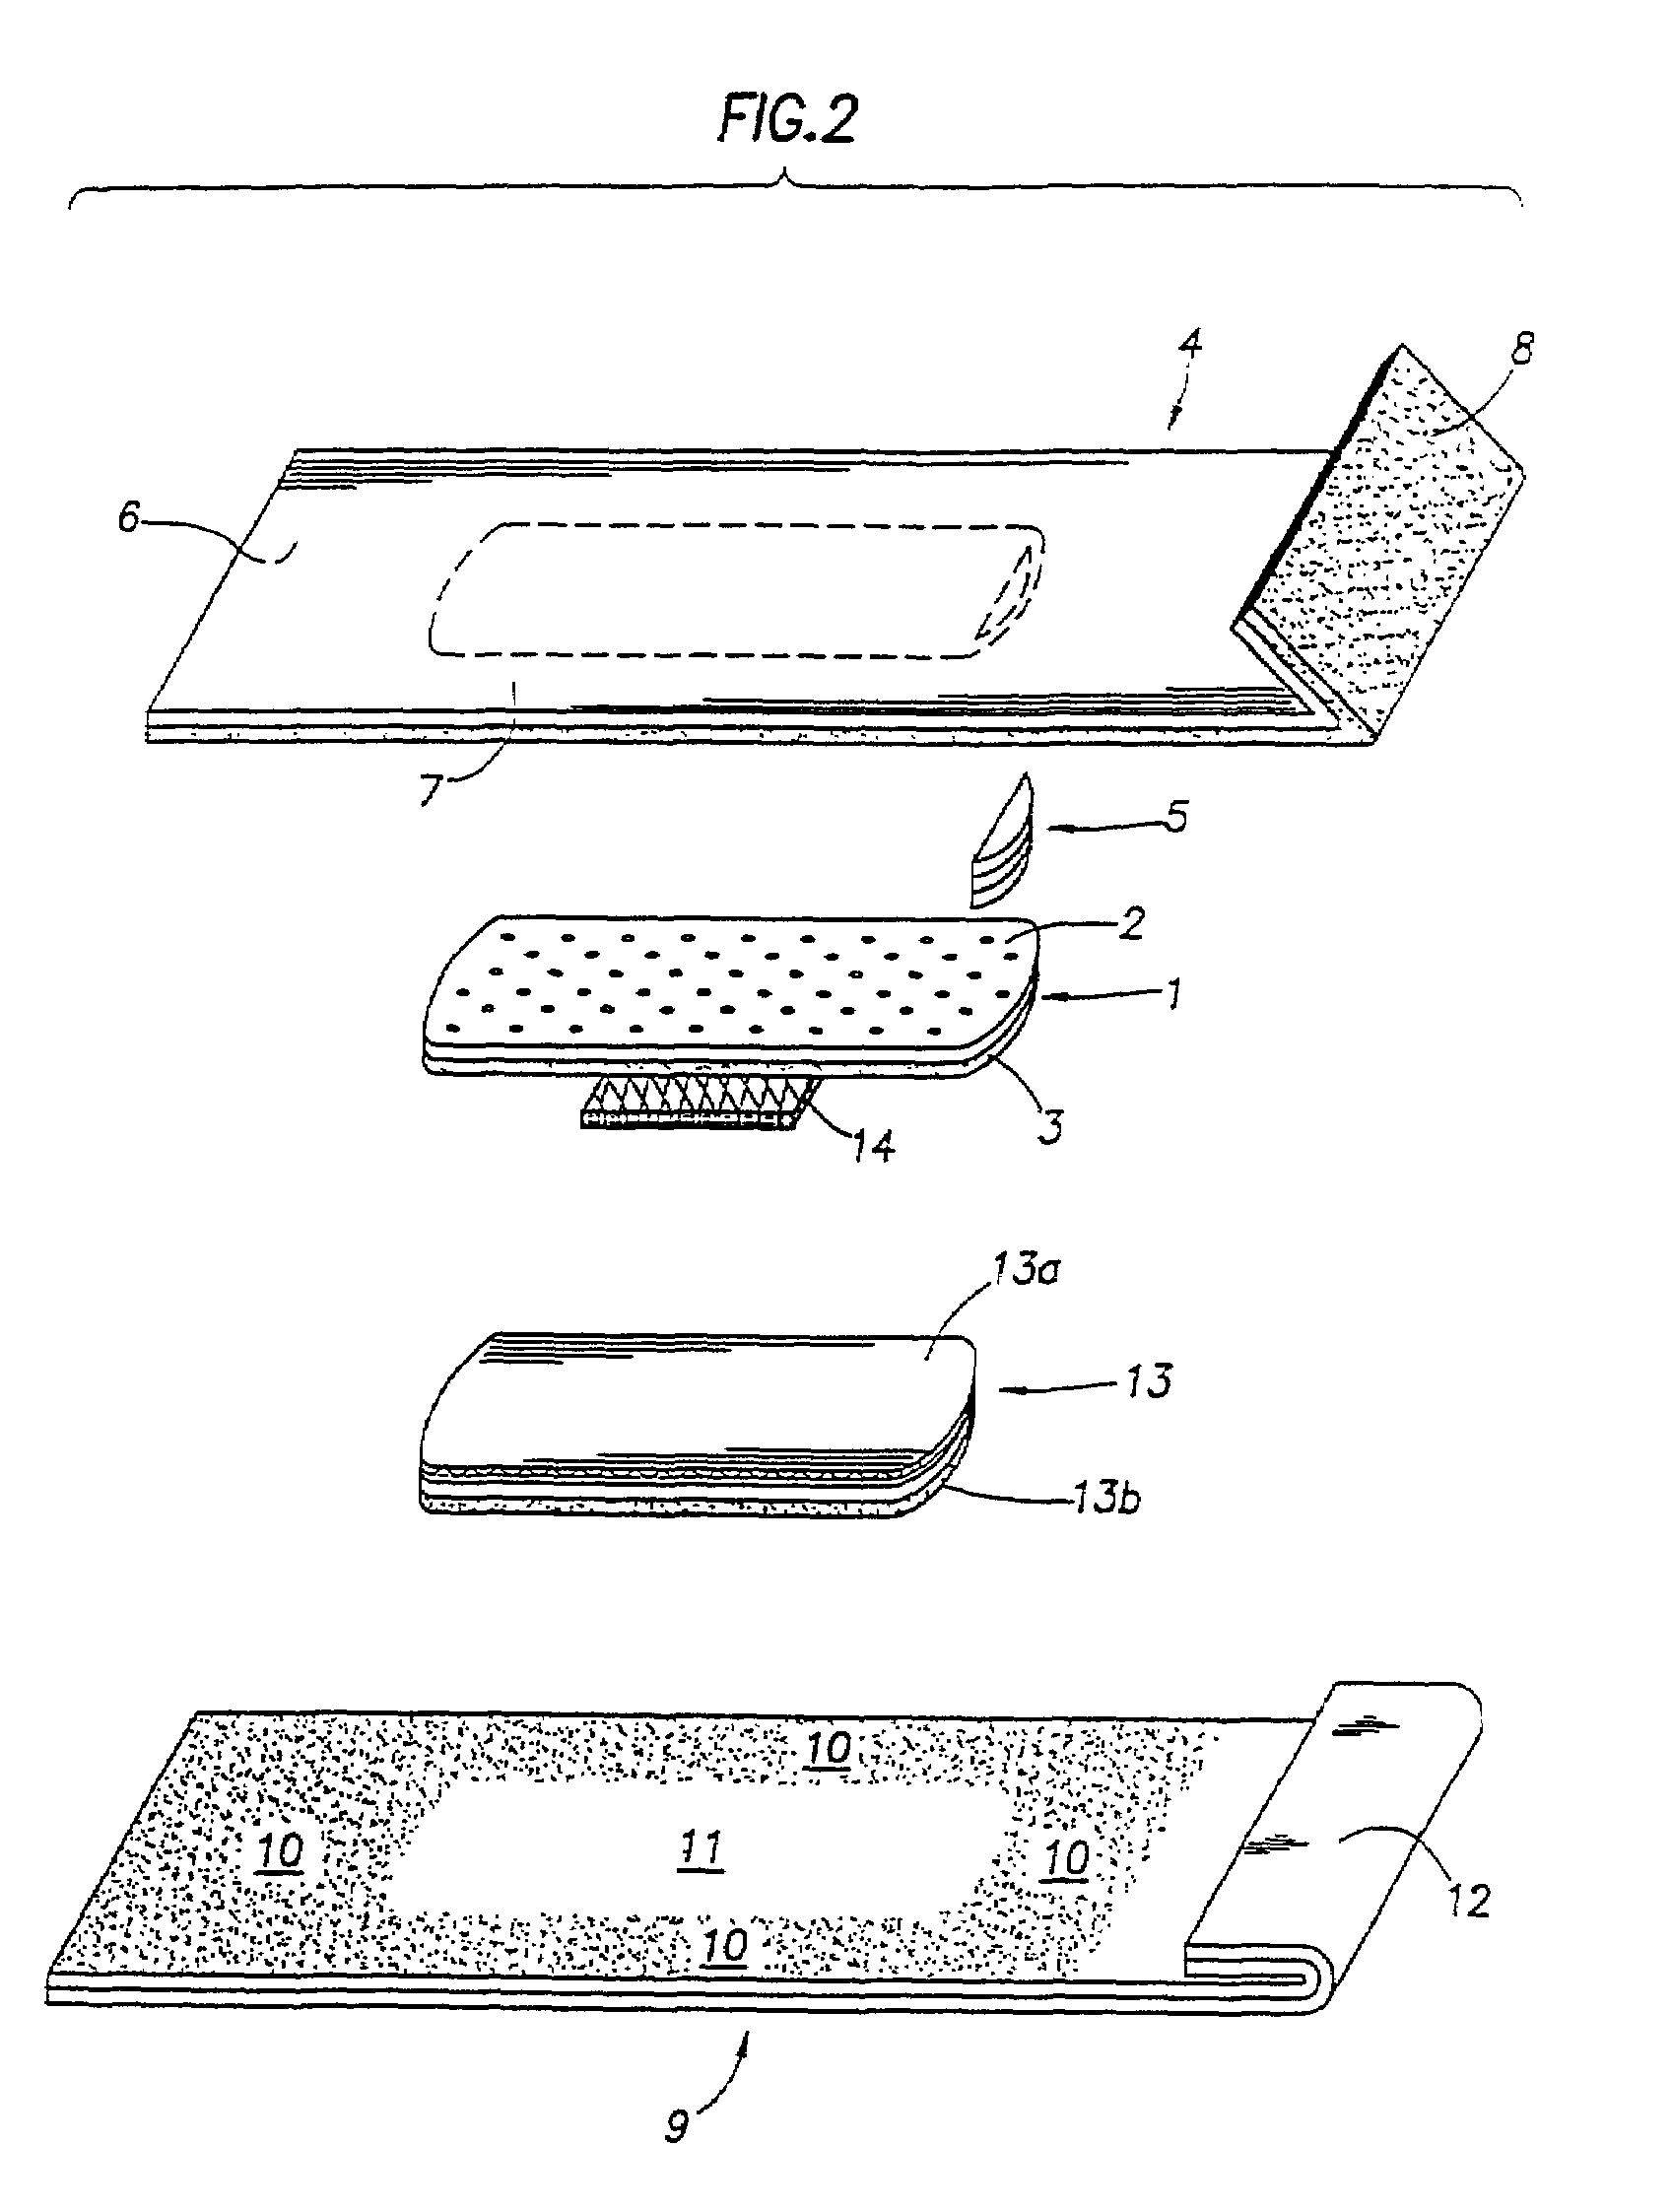 Packaging for adhesive-sided articles to allow one-handed application